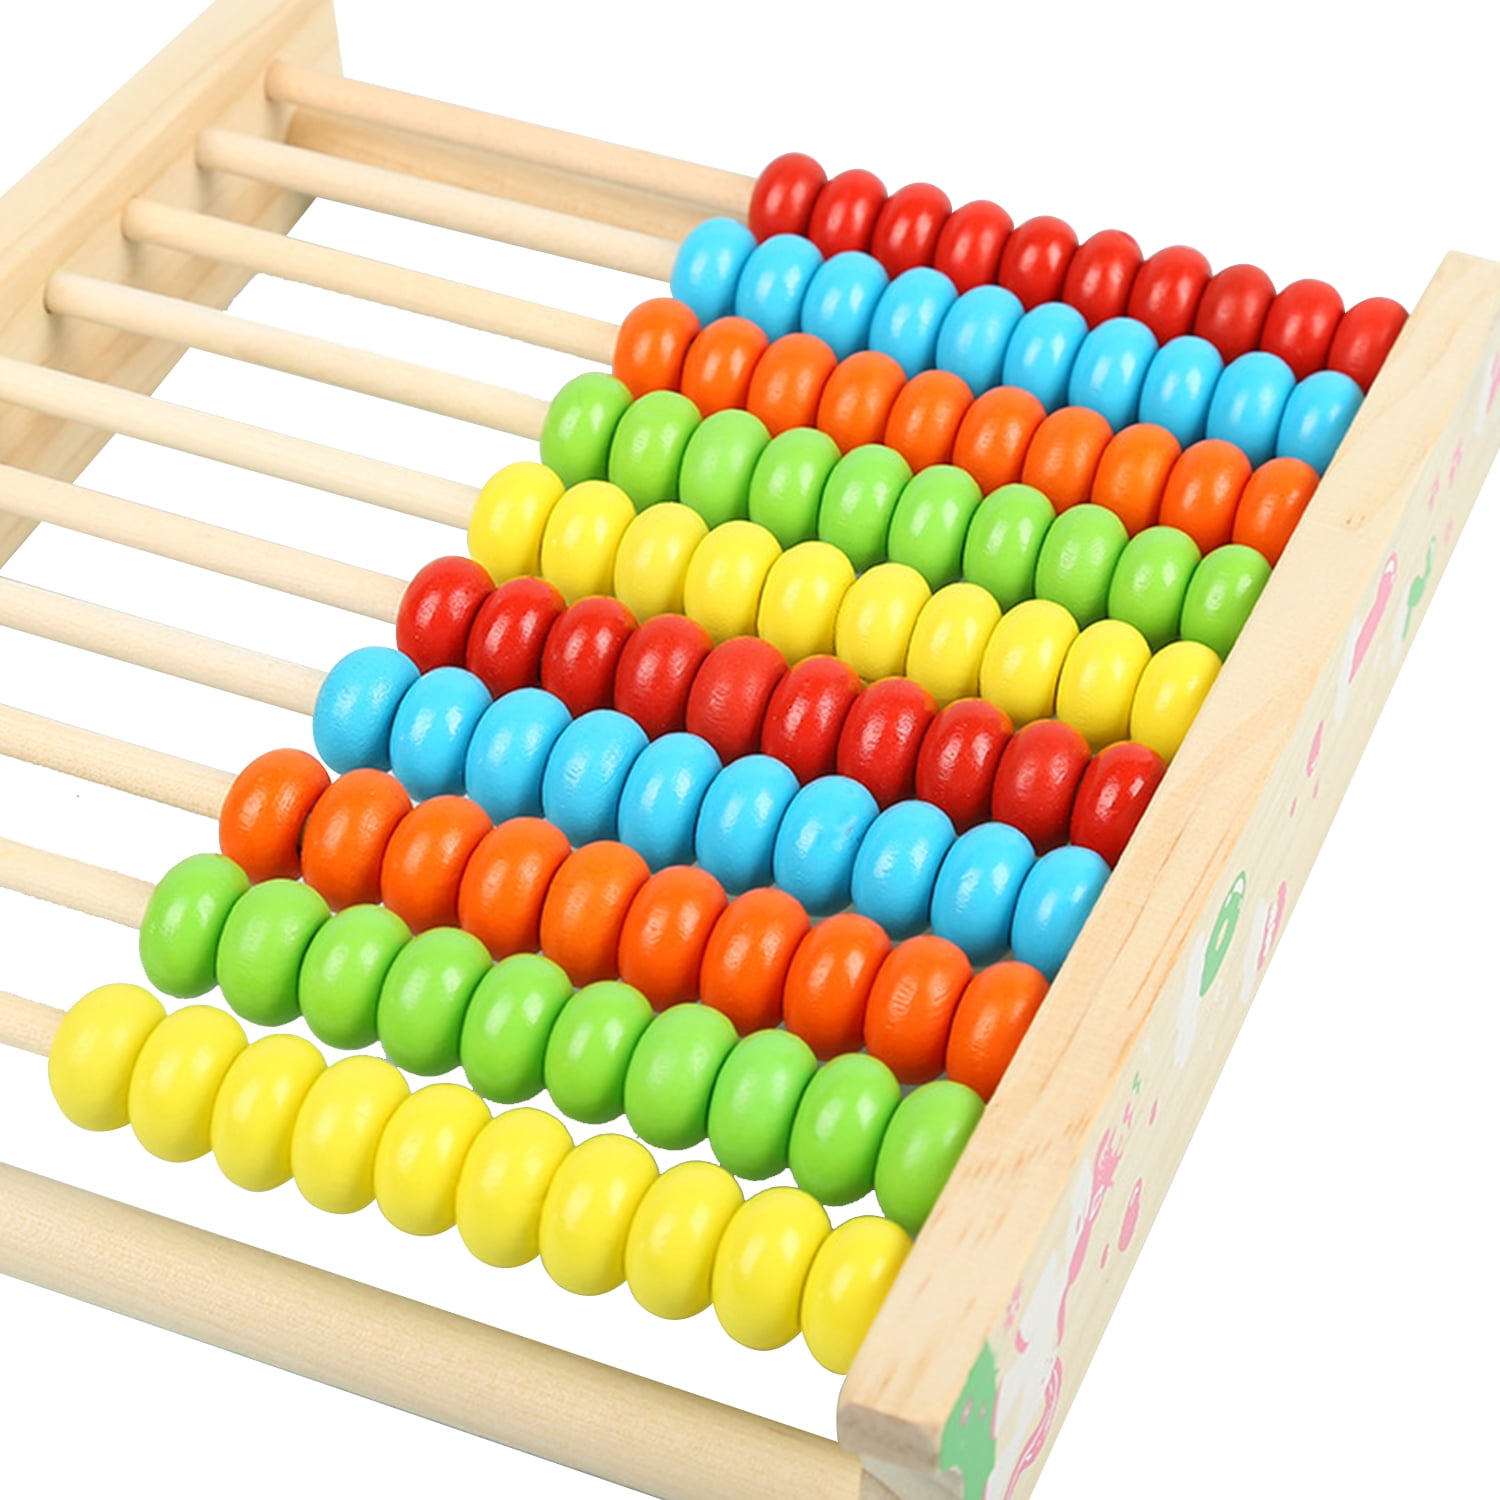 Wooden Math Number Teaching Tool Versatile Flap Abacus Calculation Frame Learning Bead Abacus with Clock Alphabet for Kids Educational Learning Toy 